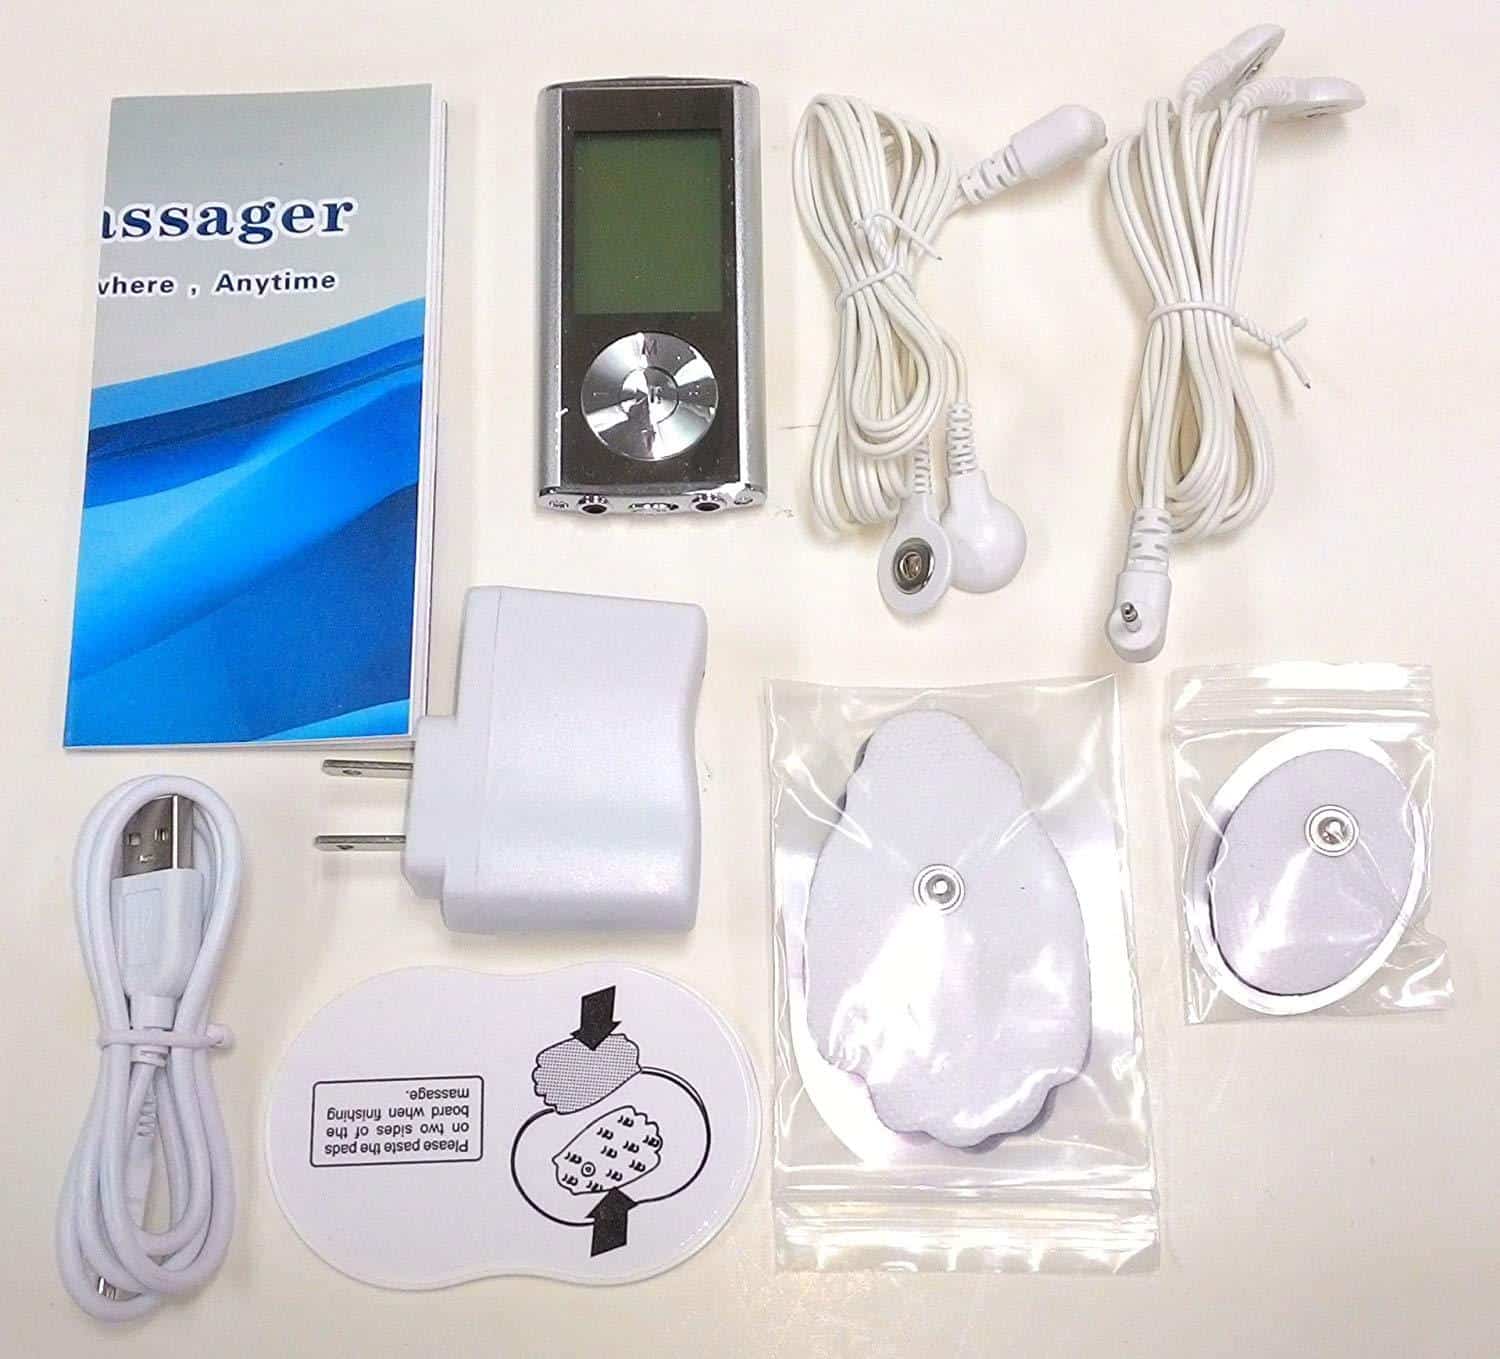 TENS EMS Unit 8 Modes Digital Palm Device Best Pain Relief Machine for Neck Back Lumbar Muscle Stimulator Therapy Body Massager